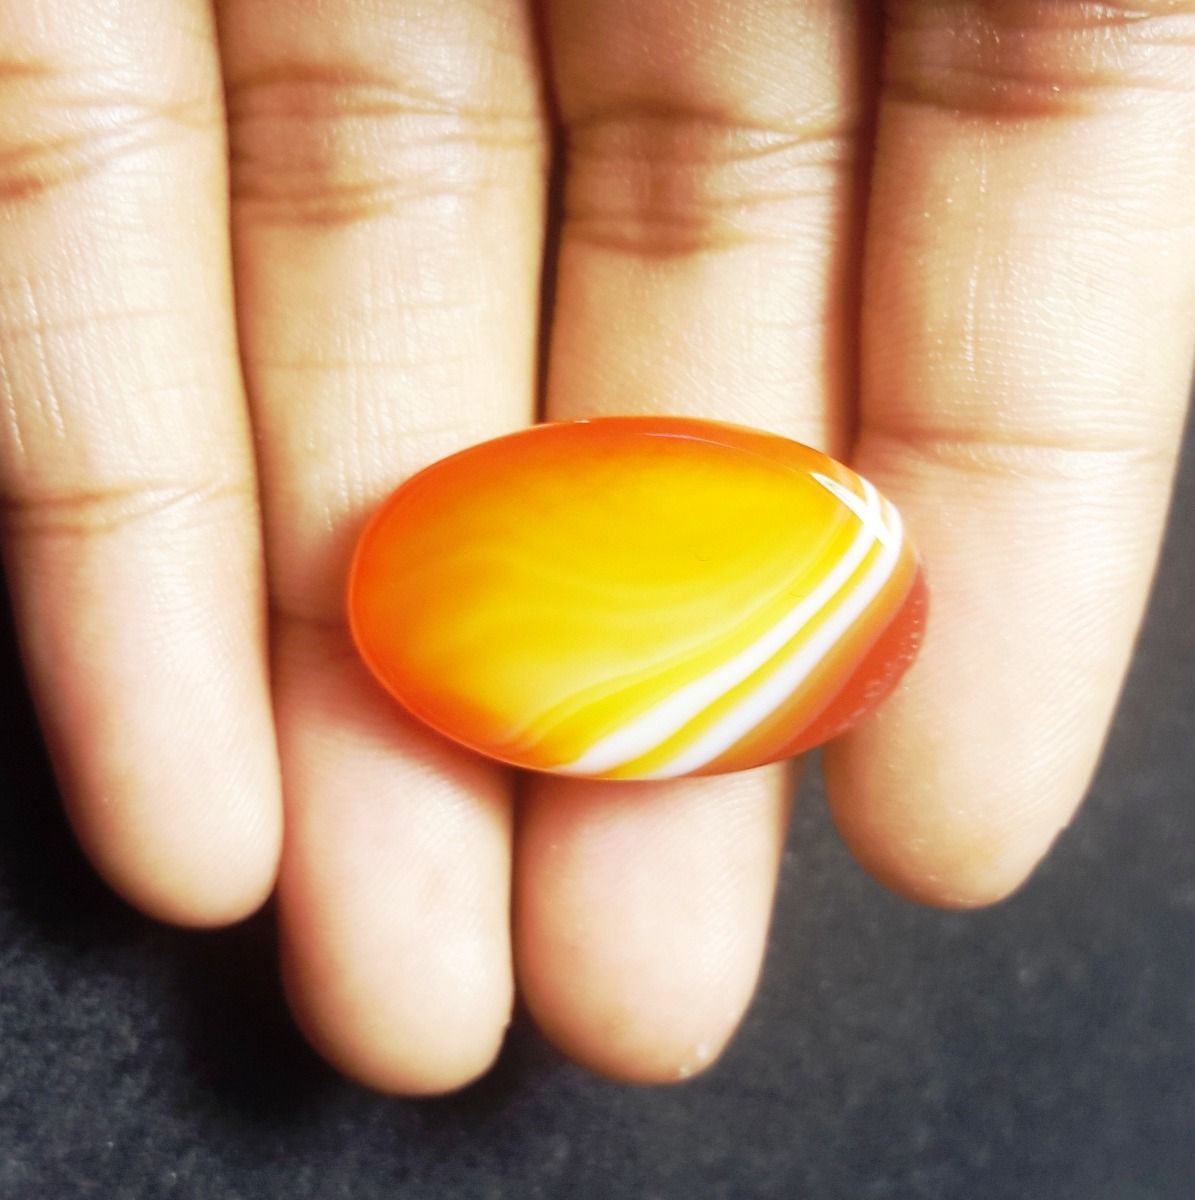 26.49 carat Natural Banded Agate 30.07 x 20.66 x5.44 mm